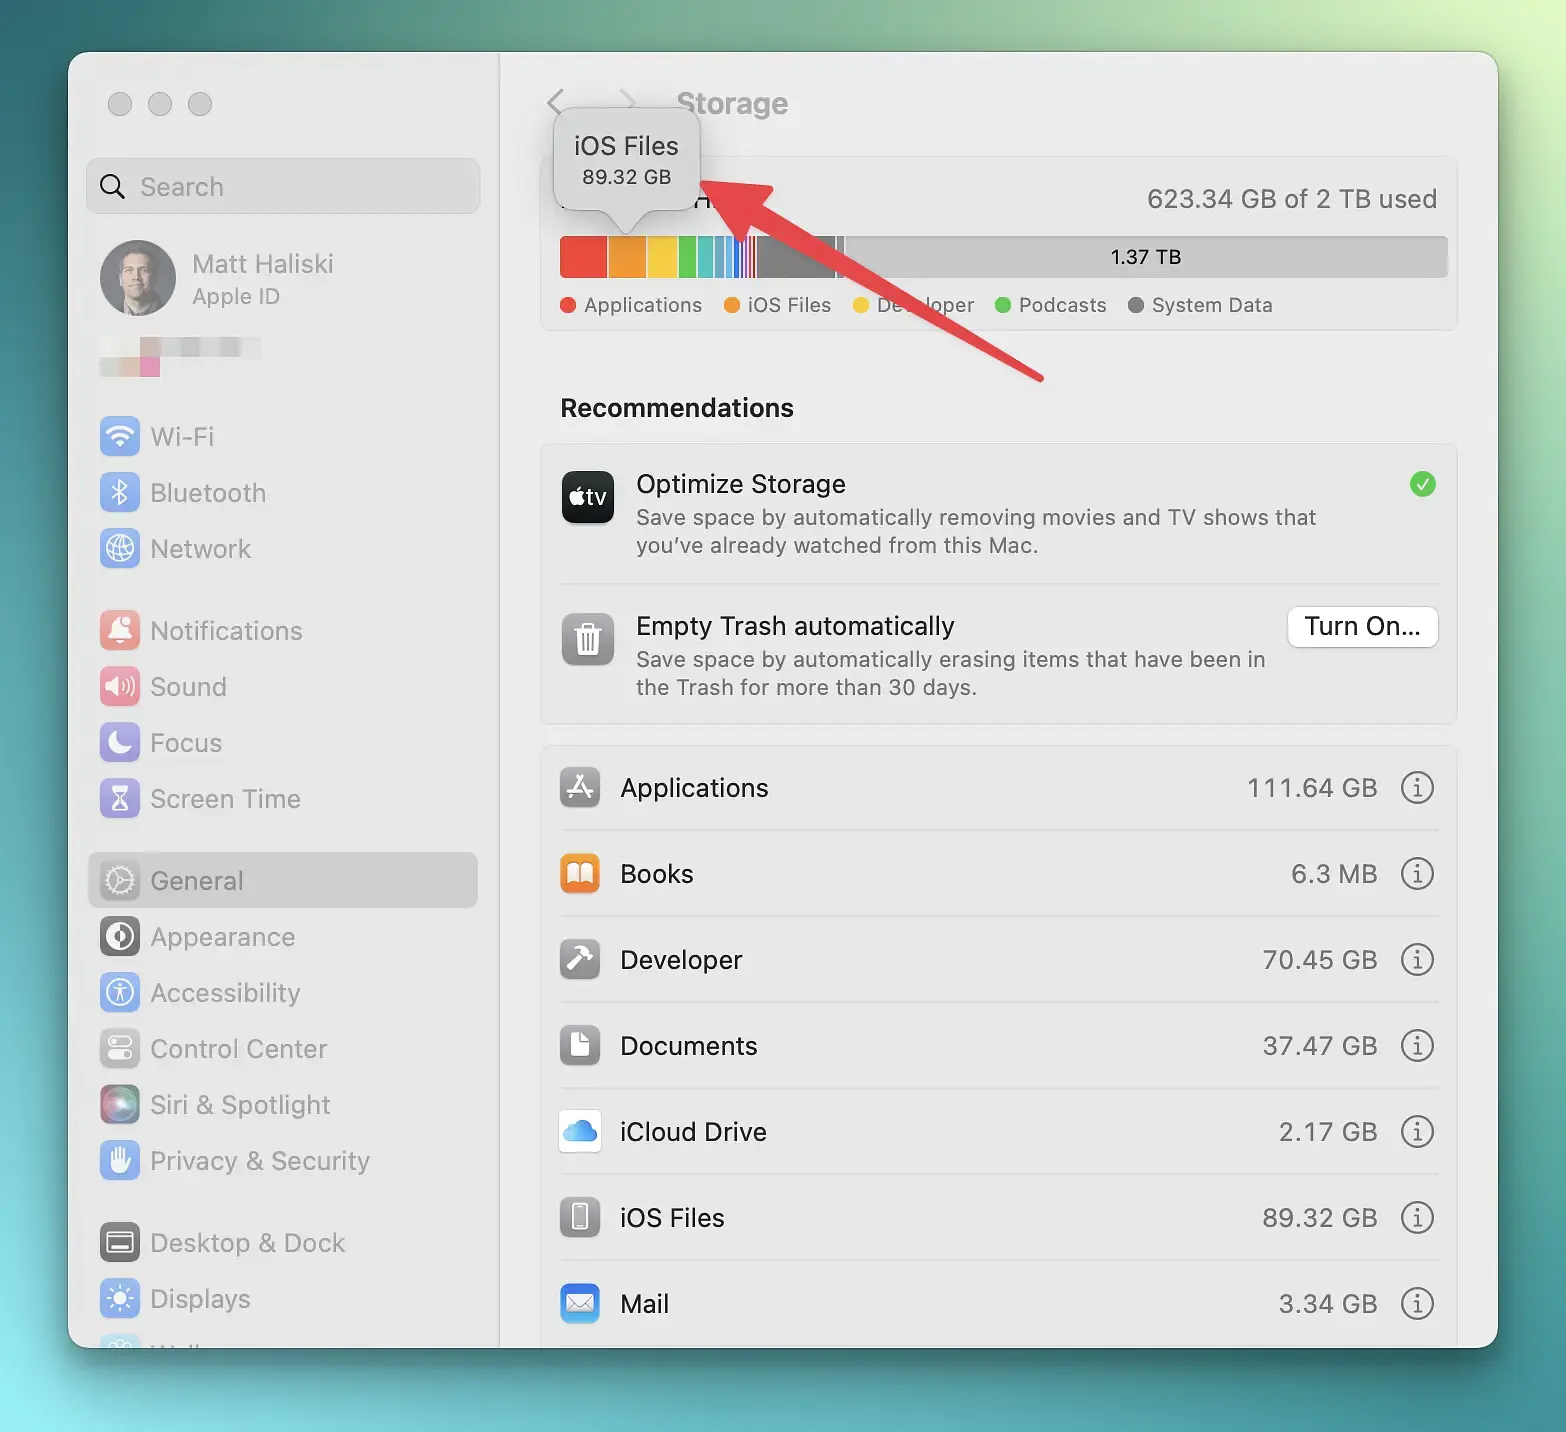 Screenshot of MacOS system settings. It shows a large amount of storage space being used by iOS development.